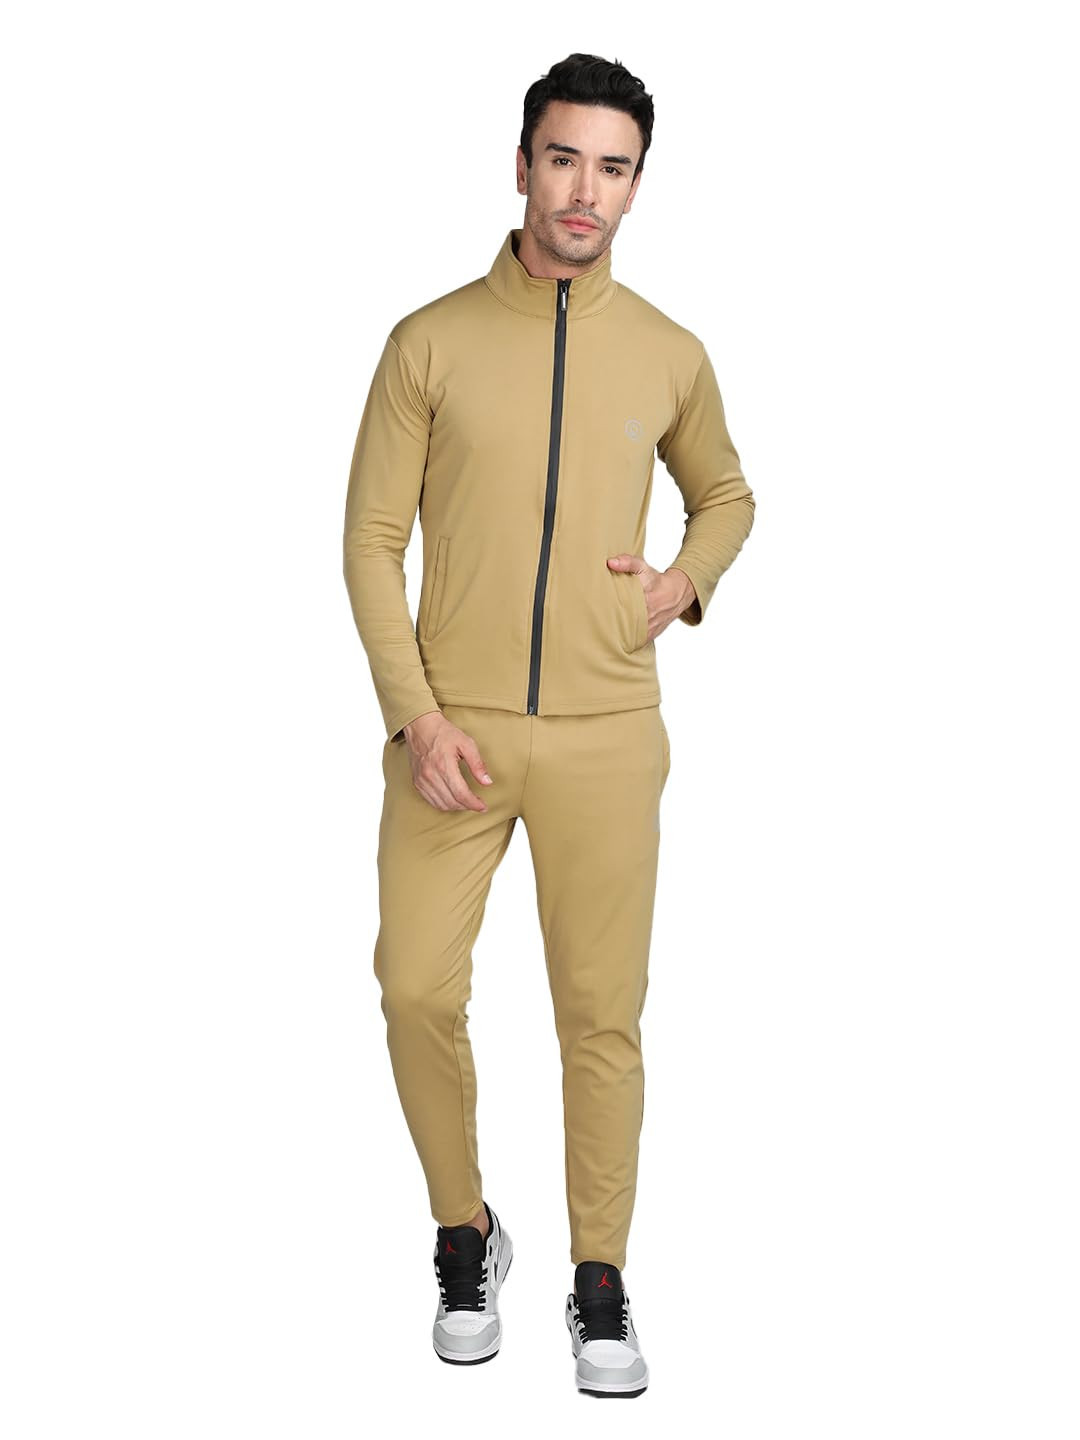 Discover 127+ track suit size super hot